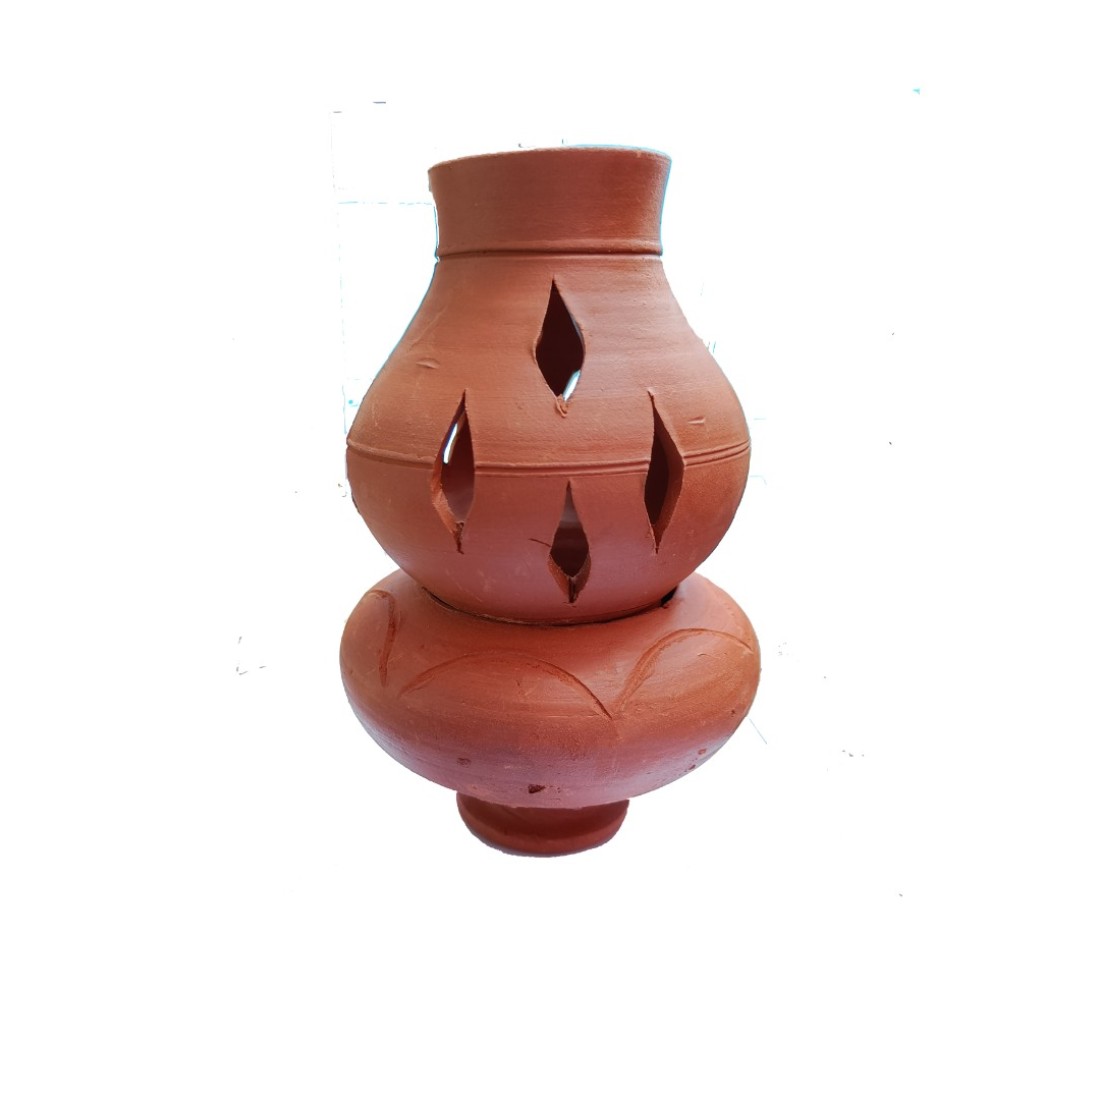 Tillage-Terracotta Clay Oil lamp Decorative Diya with lid for Home Decoration & Puja (Closed LAMP)pack of 2 2